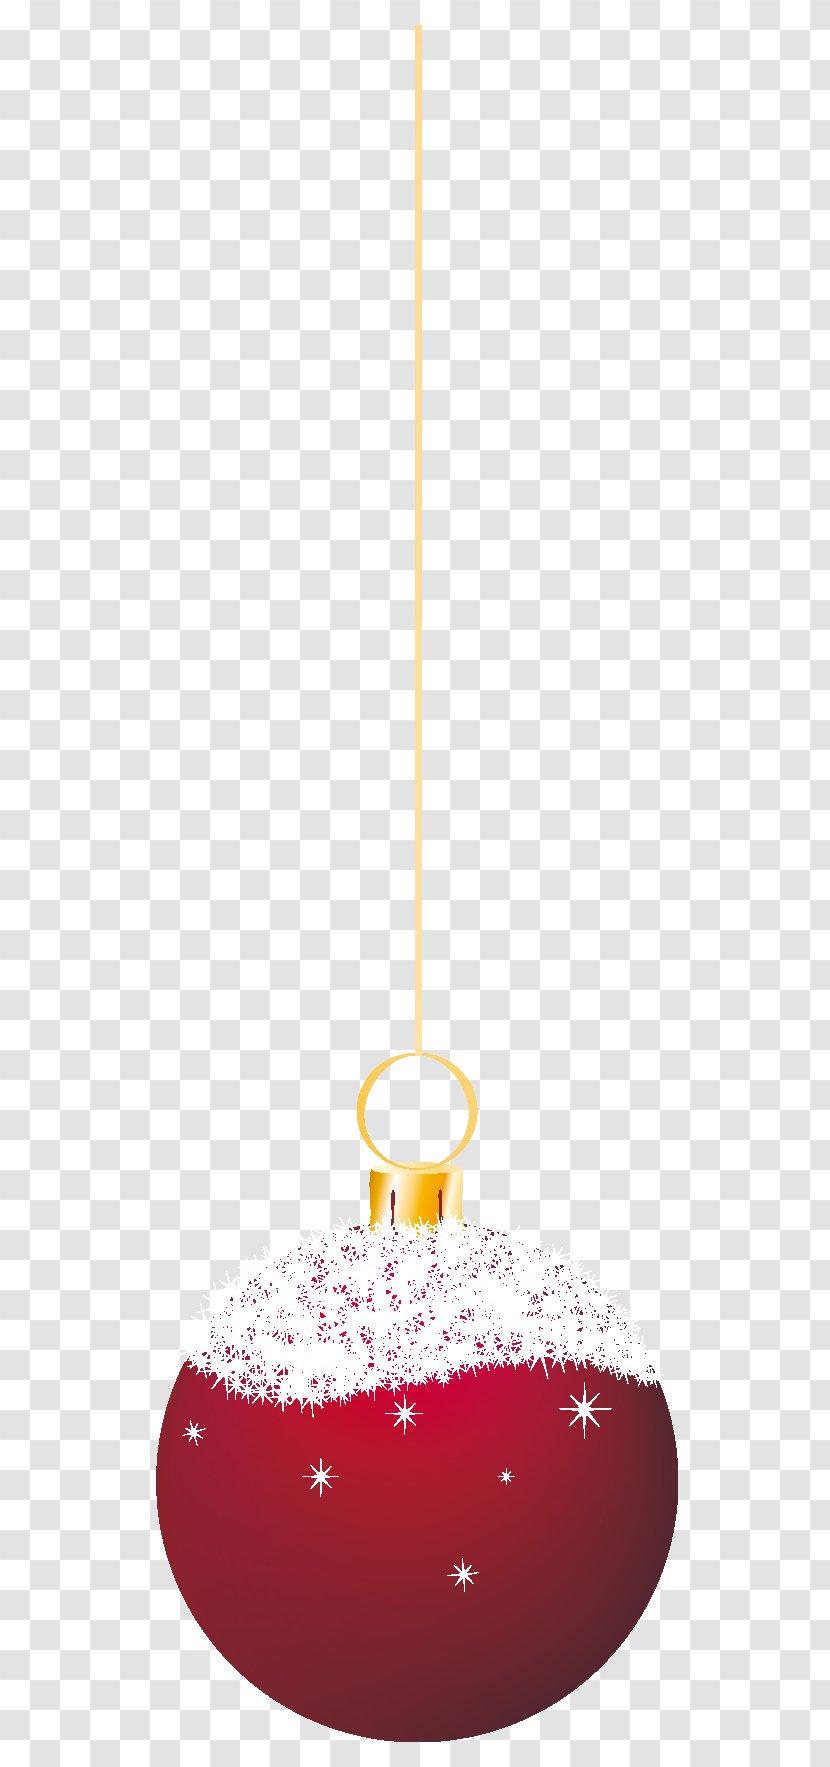 Cup - Drinkware - Transparent Snowy Christmas Ball Red Ornament Clipart Transparent PNG